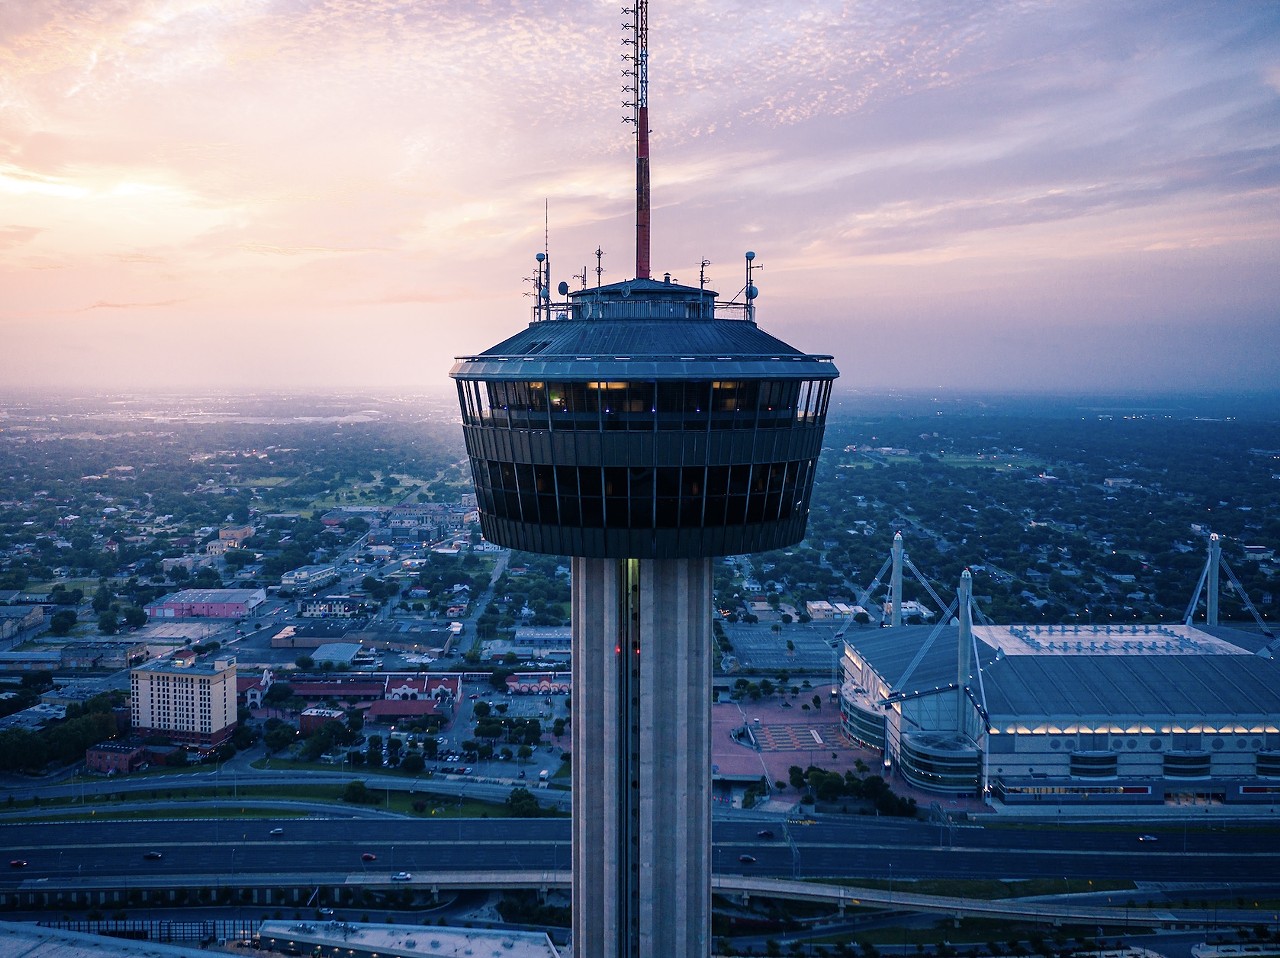 You can actually take the stairs at the Tower of the Americas. 
It’ll only take you 952 steps to reach the top of the 750-foot-tall structure.